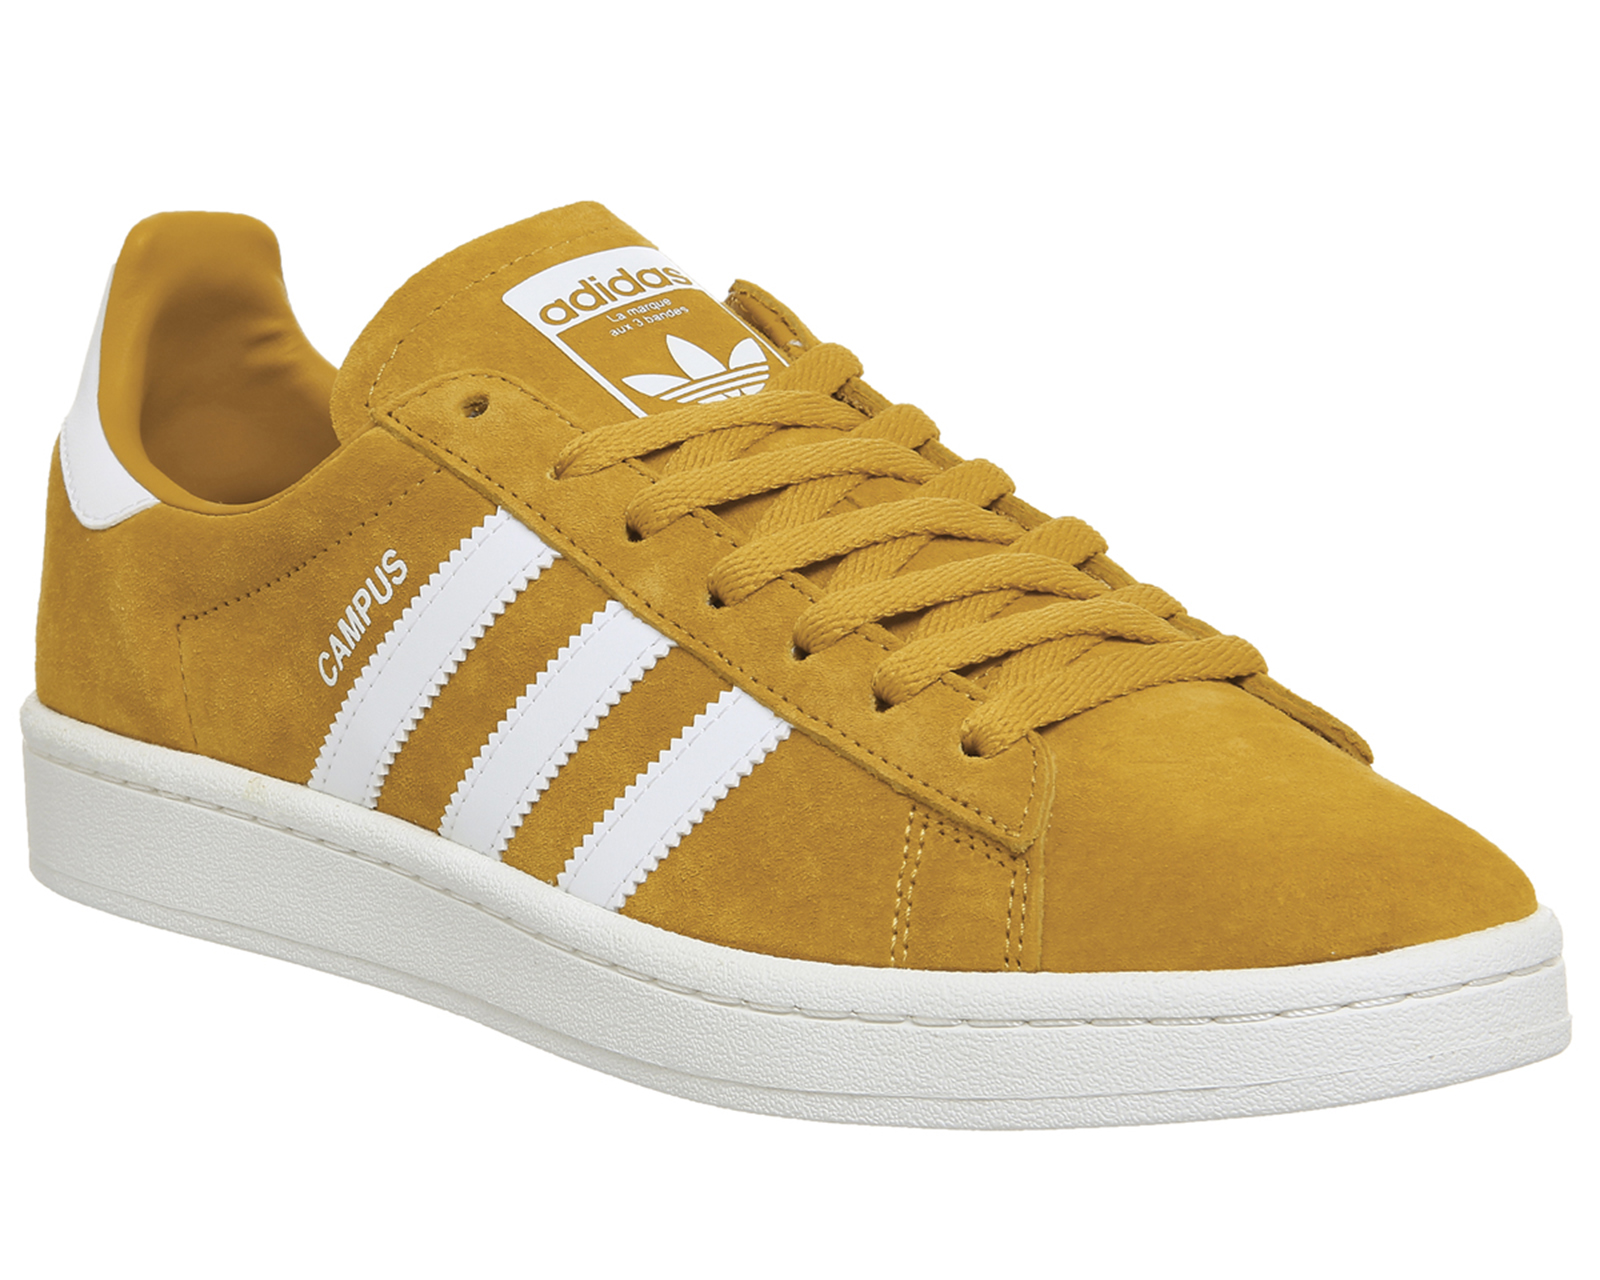 adidas Campus Trainers Tactile Yellow White - Unisex Sports